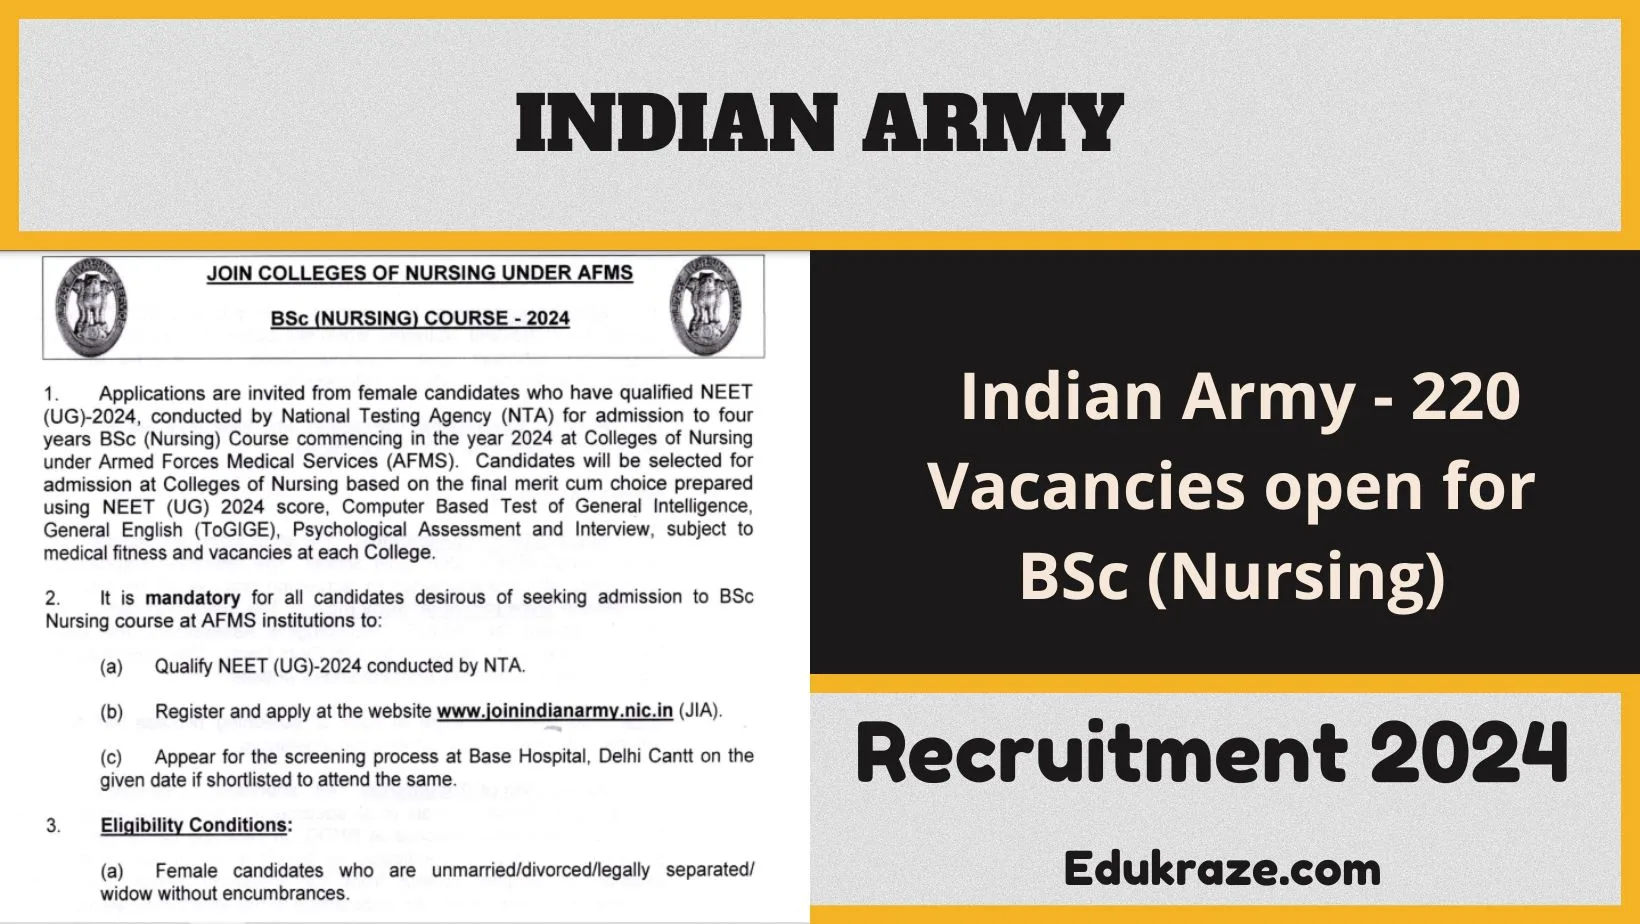 Indian Army Recruitment Out for BSc Nursing Course, 220 Vacancies Available!